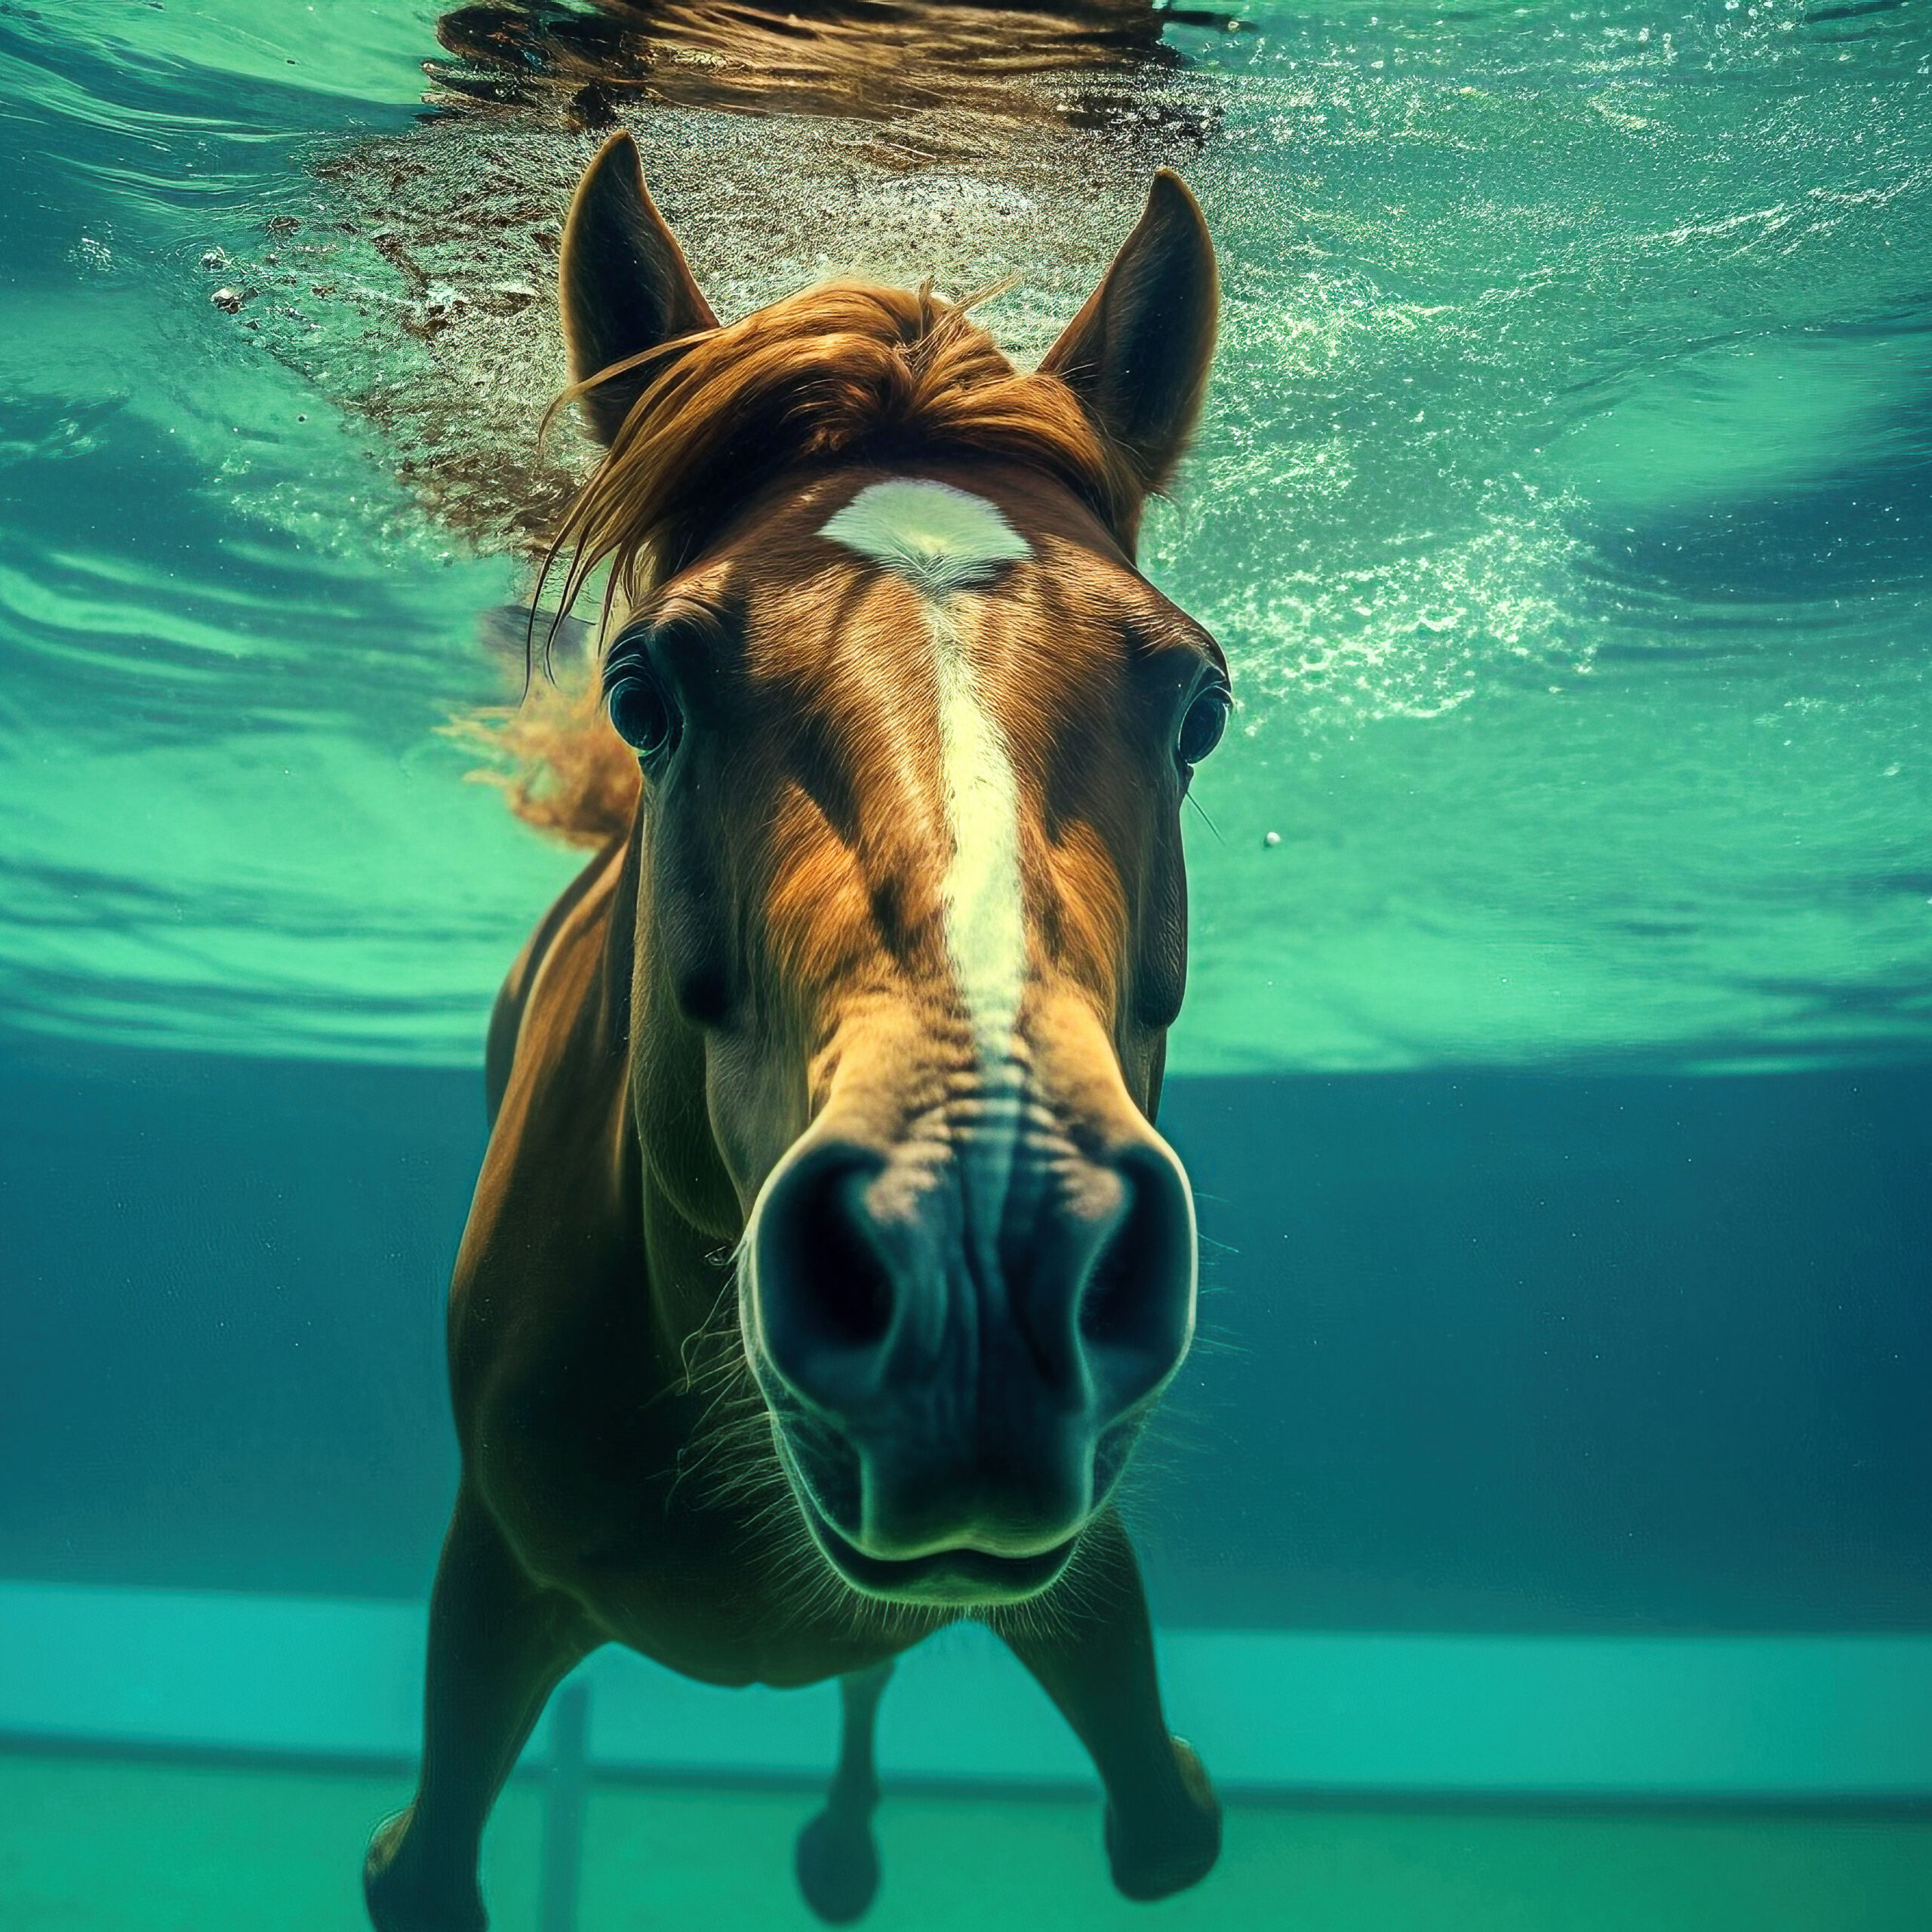 A brown horse swimming underwater in a pool.